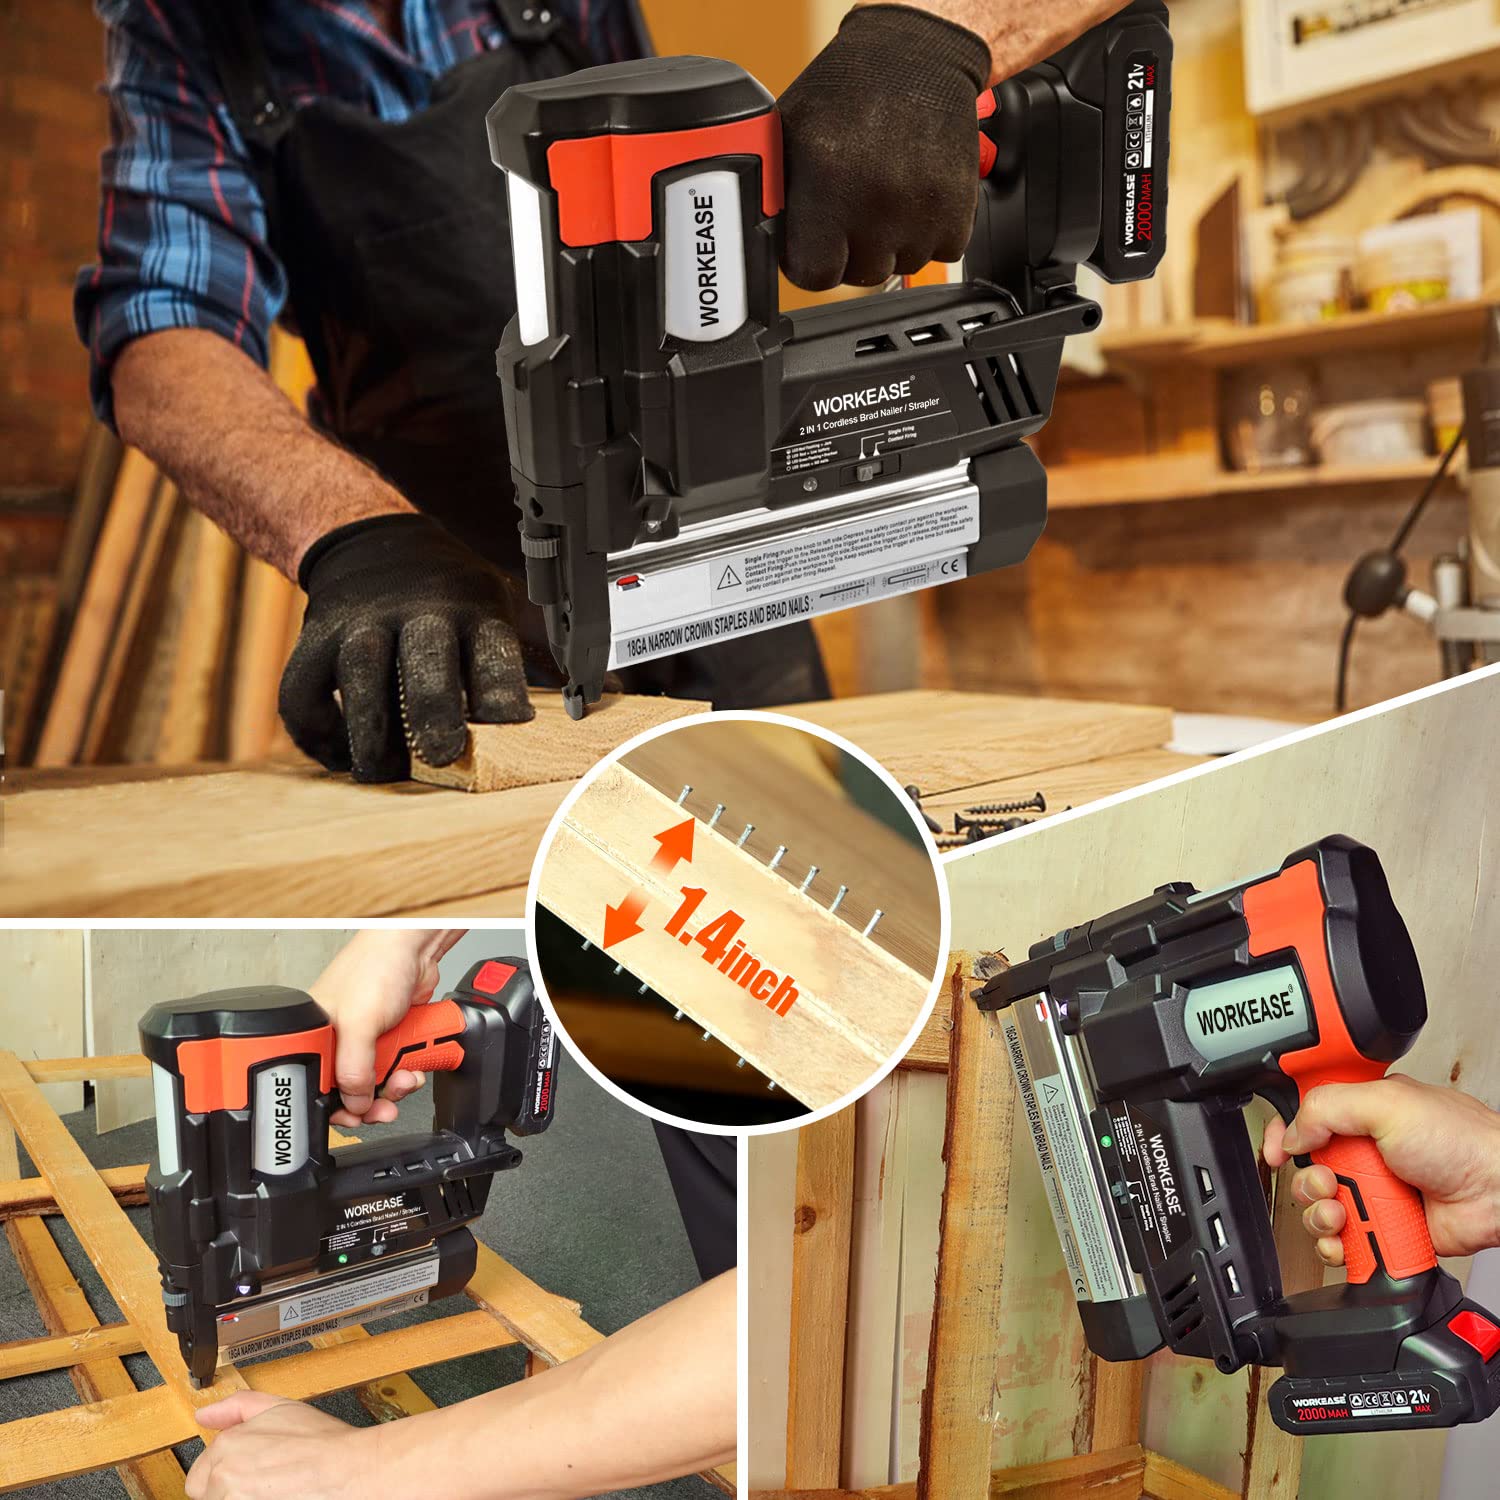 21V Cordless Brad Nailer, 18 Gauge 2 in 1 Nail Gun/Stapler Gun Battery Powered with 2.0Ah Battery, Fast Charger, 2000 Nails & Staples, Earplugs, Electric Staple Gun for Furniture Woodworking